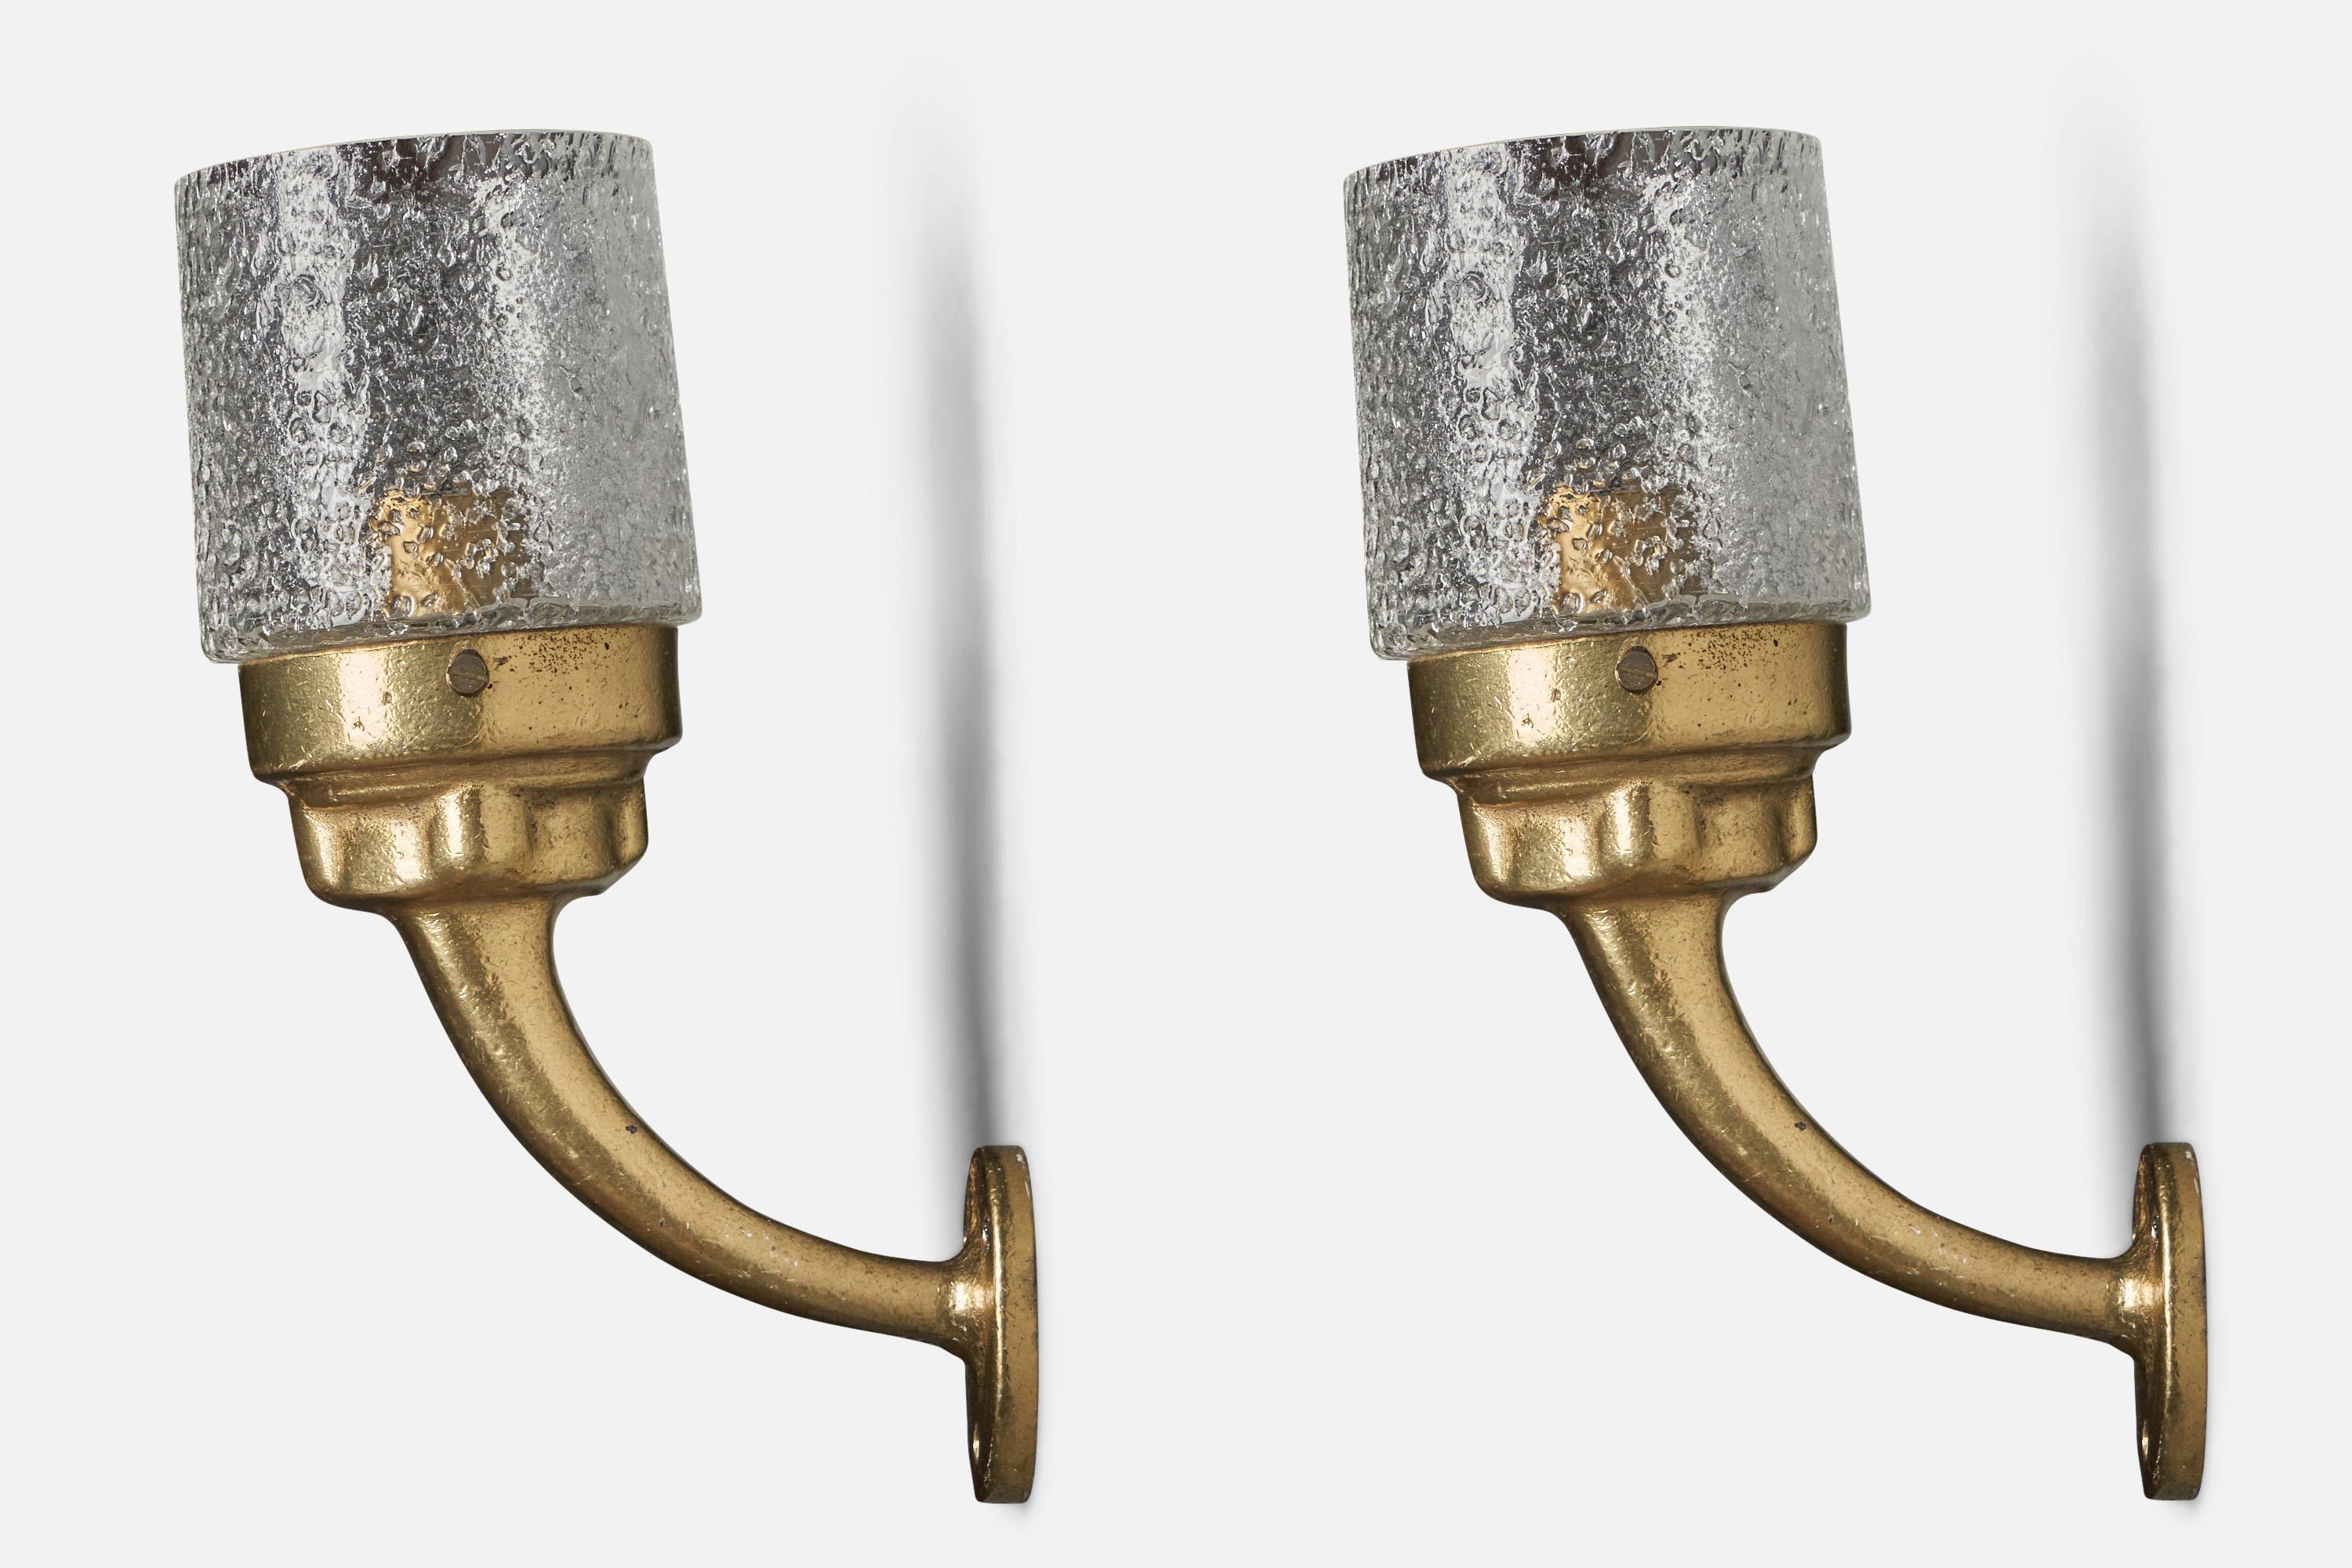 A pair of gilt-painted brass and glass wall lights, Italy, c. 1930s.

Overall Dimensions (inches): 13.25